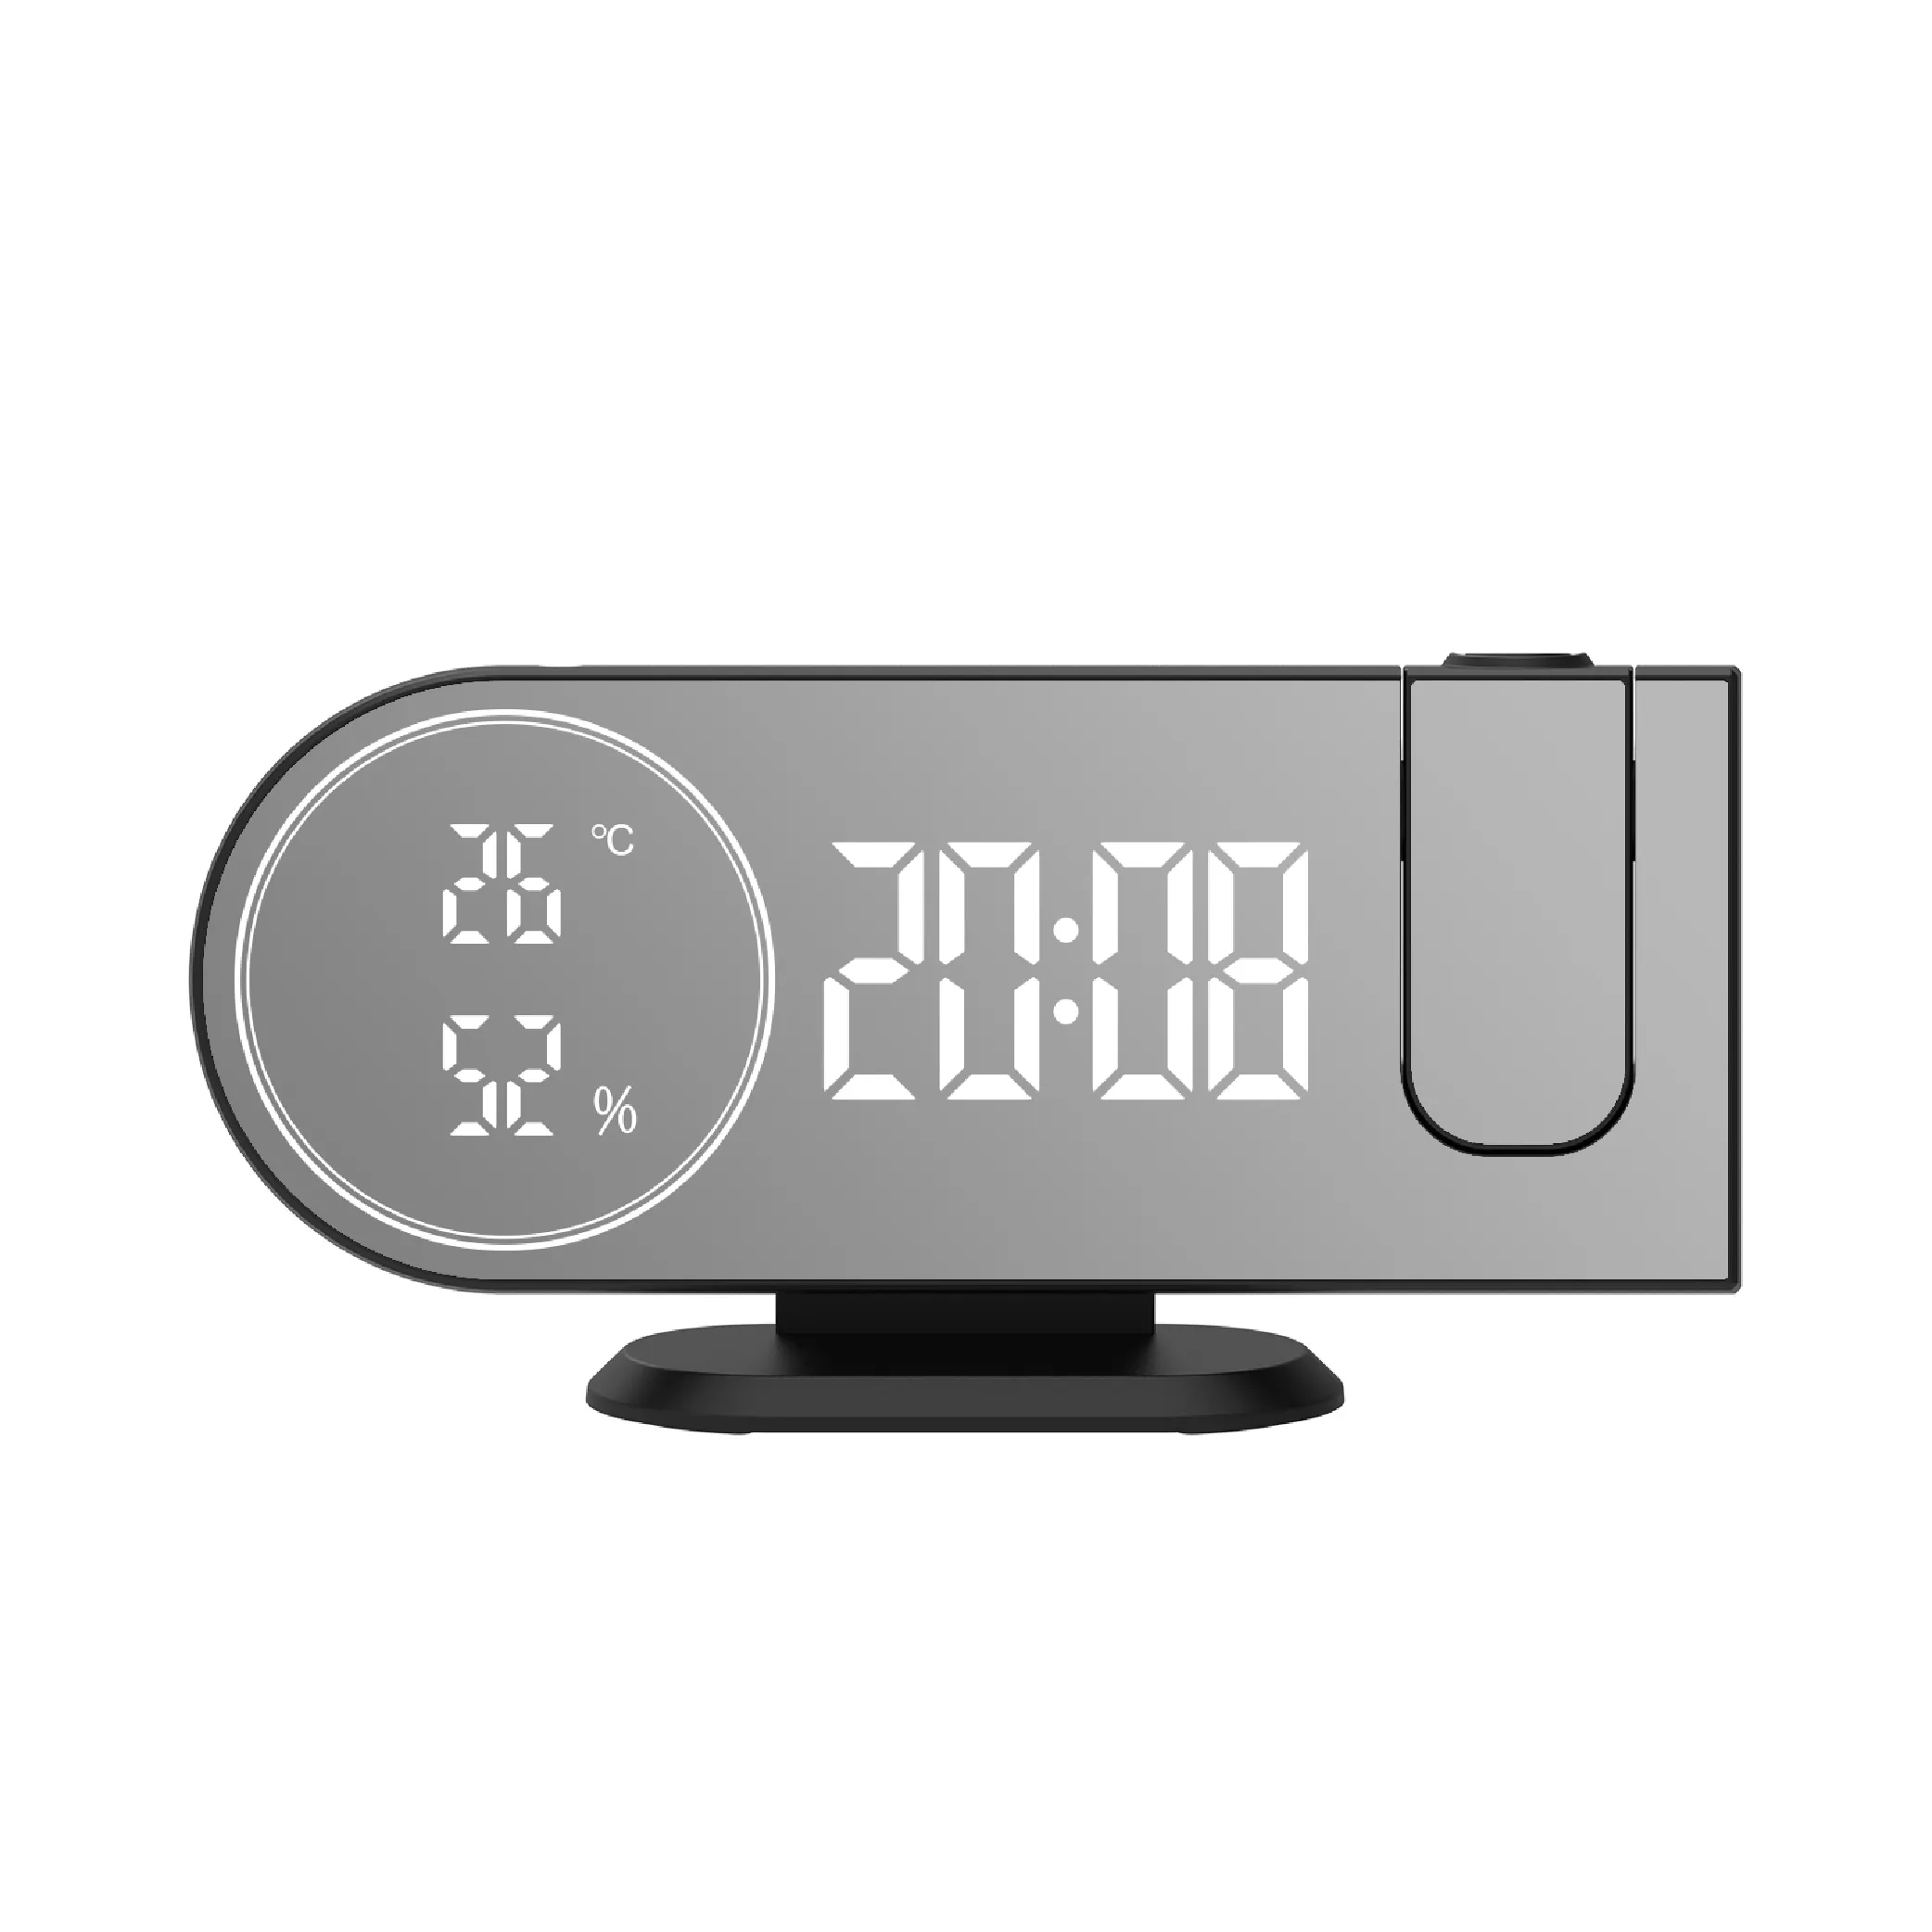 Projection Digital Alarm Clock For Bedroom 2022 Newest Radio Alarm Clock With Projection On Ceiling USB Charger Ports Dual Alarm